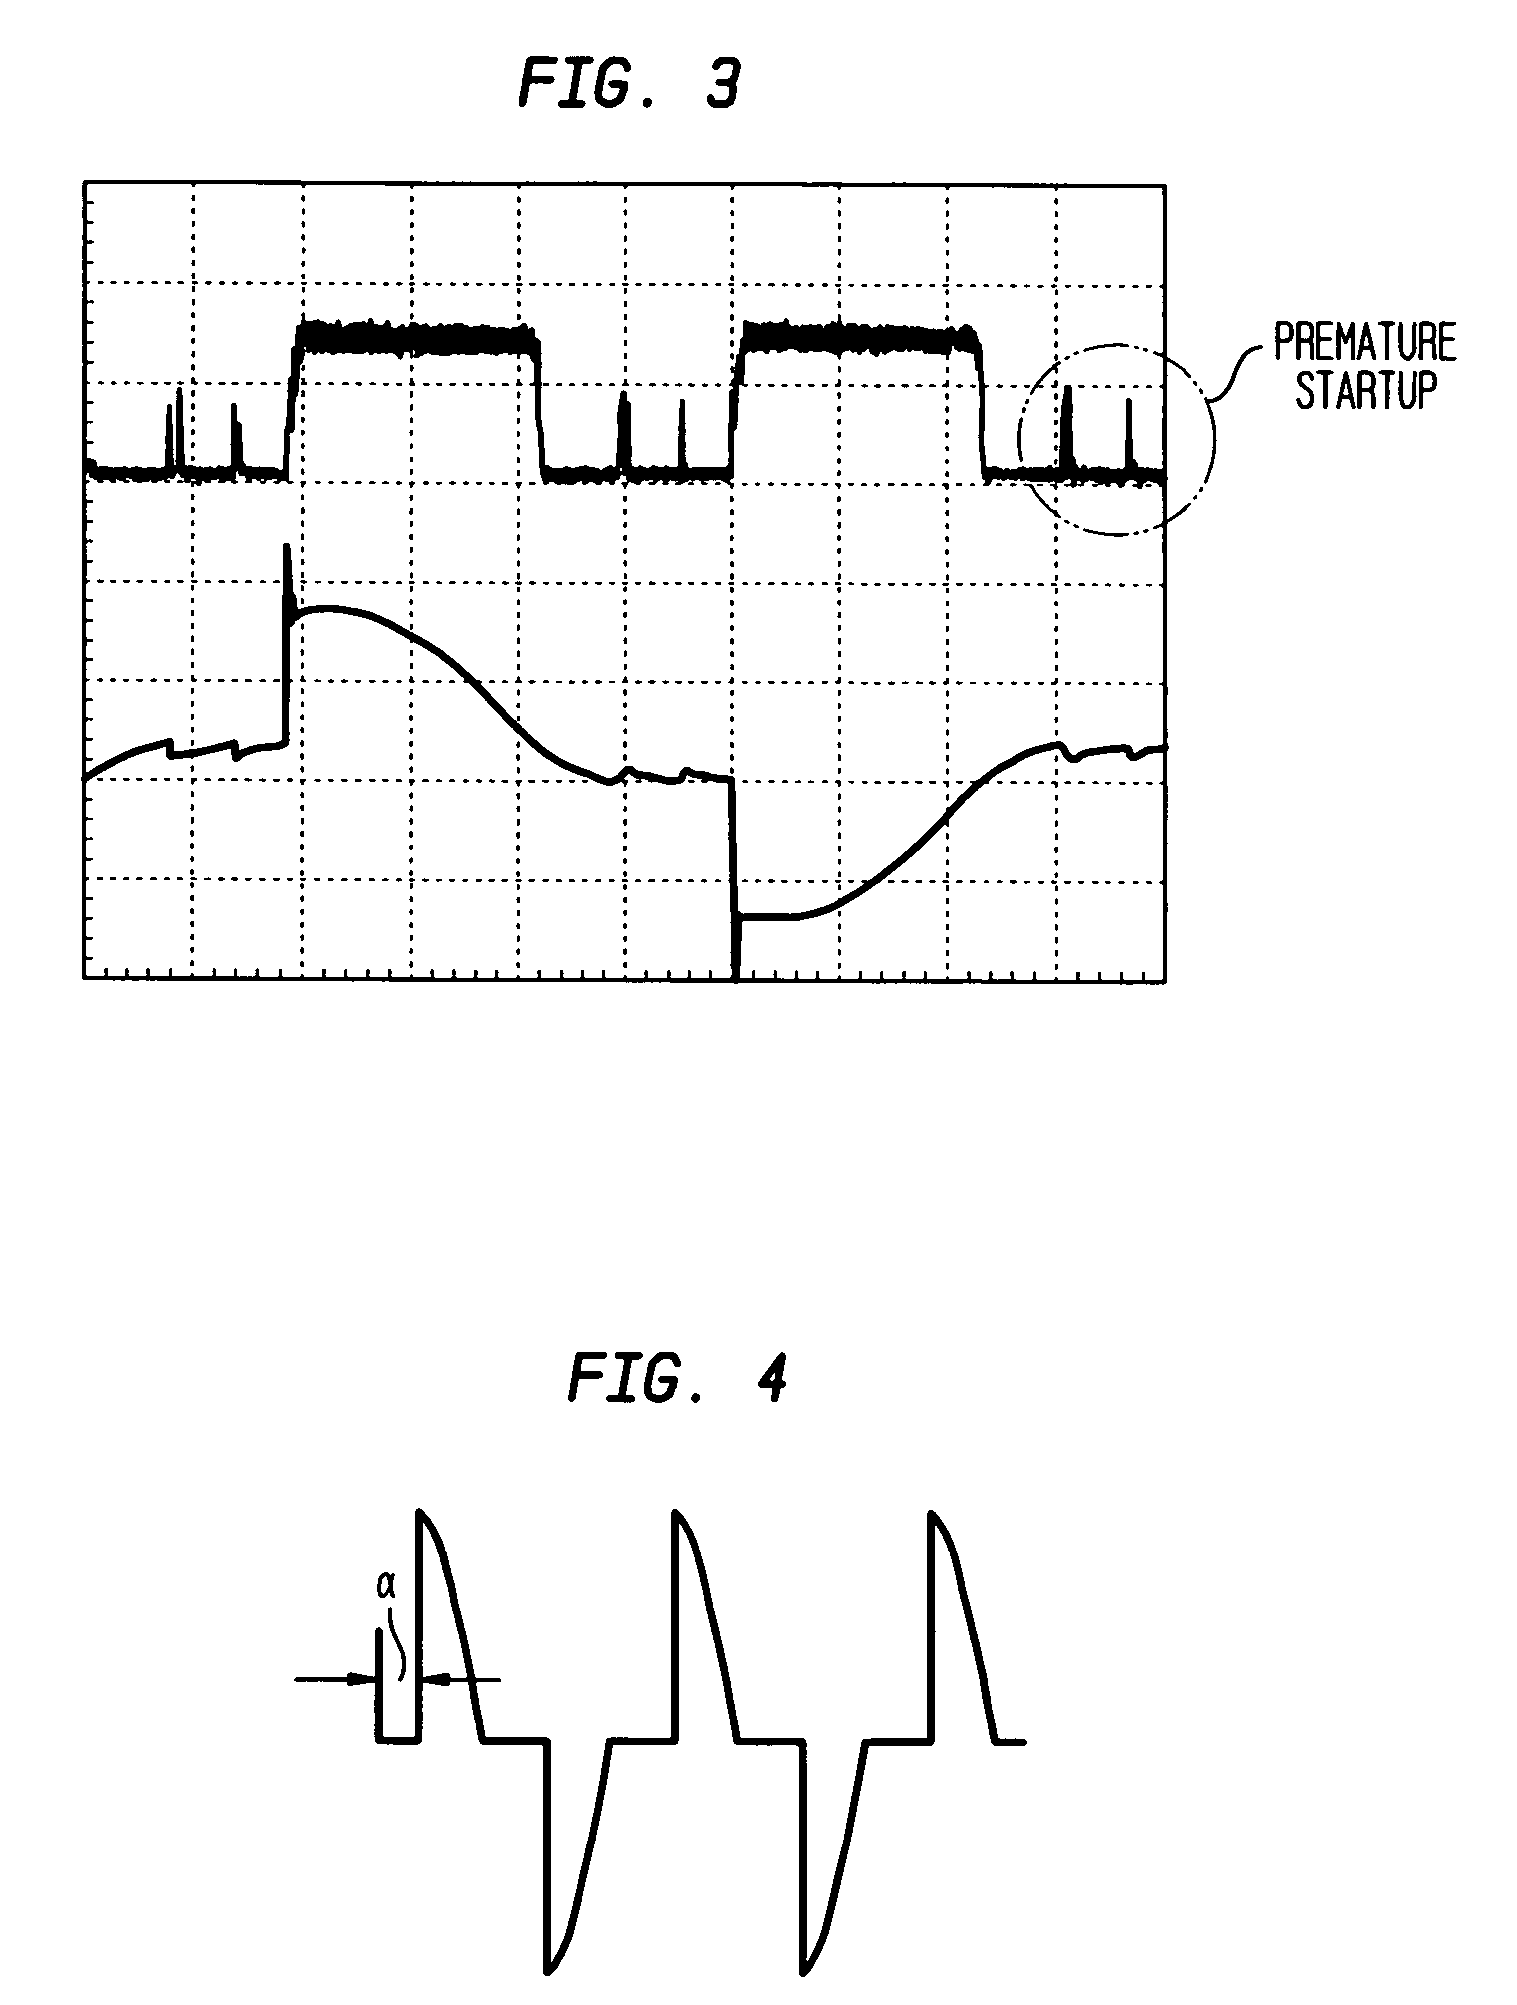 Impedance matching circuit for current regulation of solid state lighting